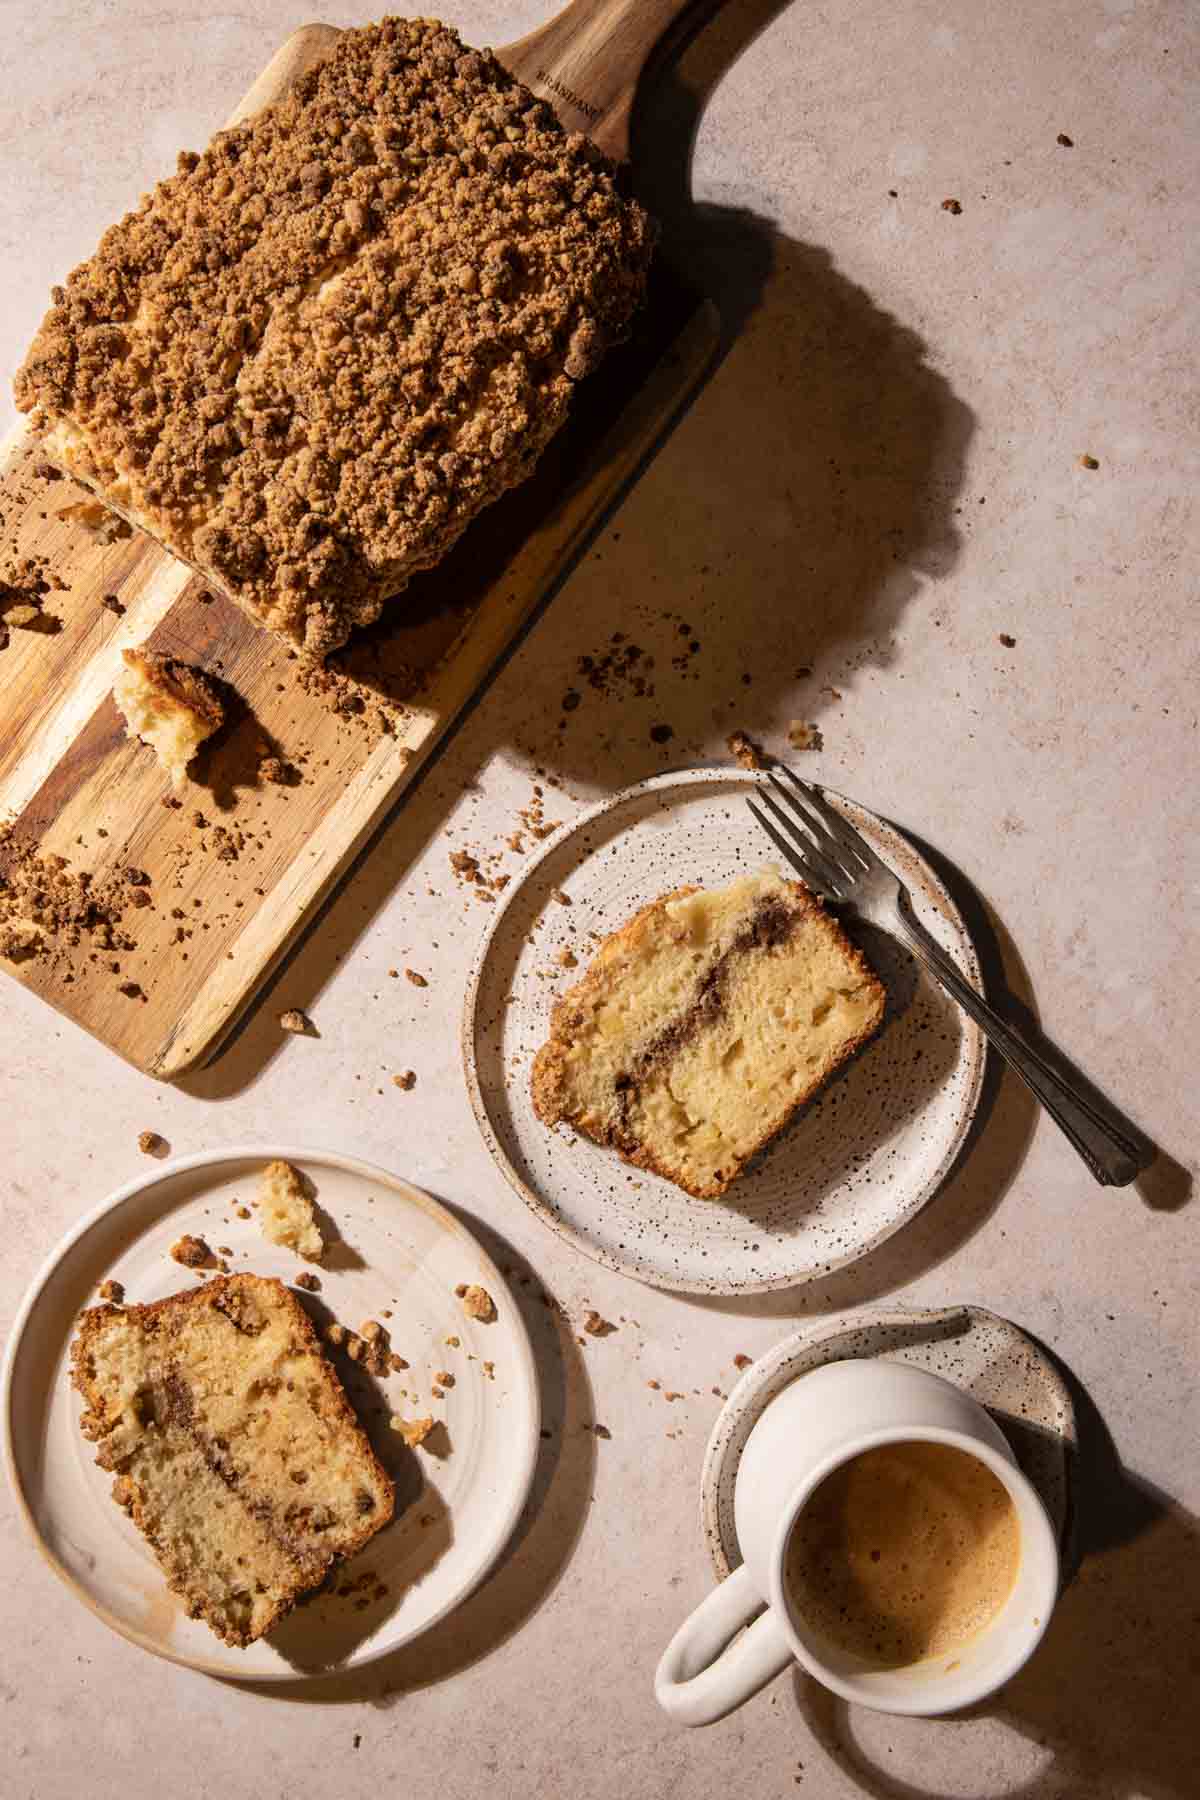 Slices of apple streusel cake on plates with coffee